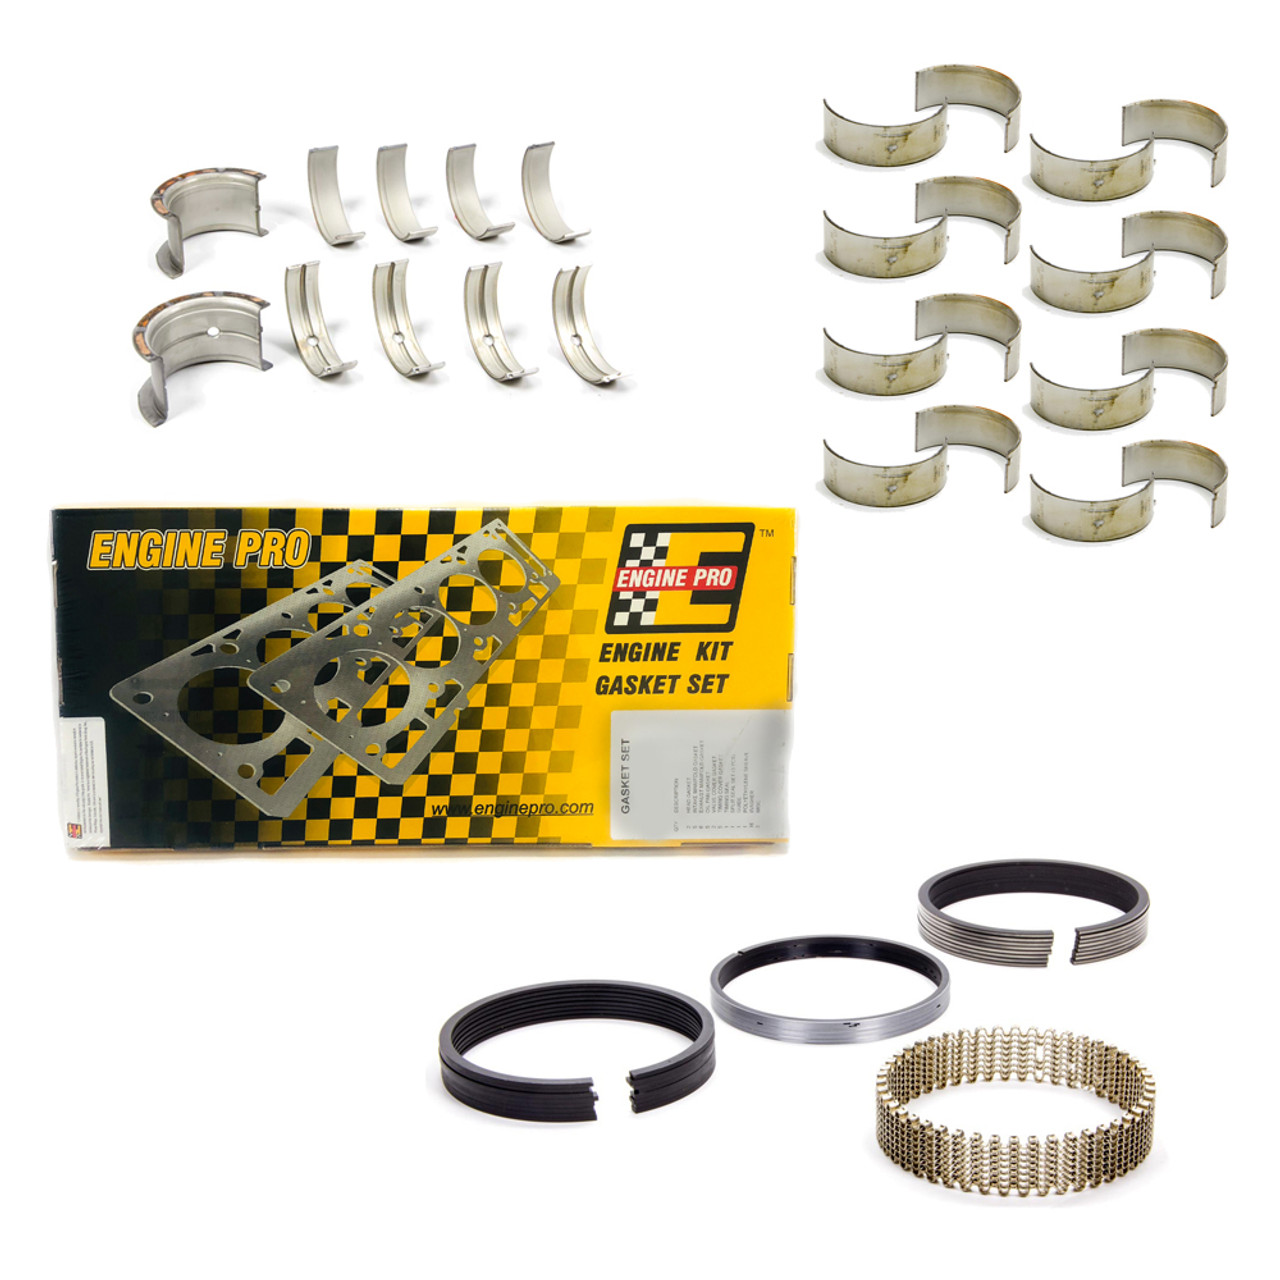 std Re-Ring Engine Kit compatible with SBC Chevy 400 1970-1980 Gaskets+Bearings+Rings 